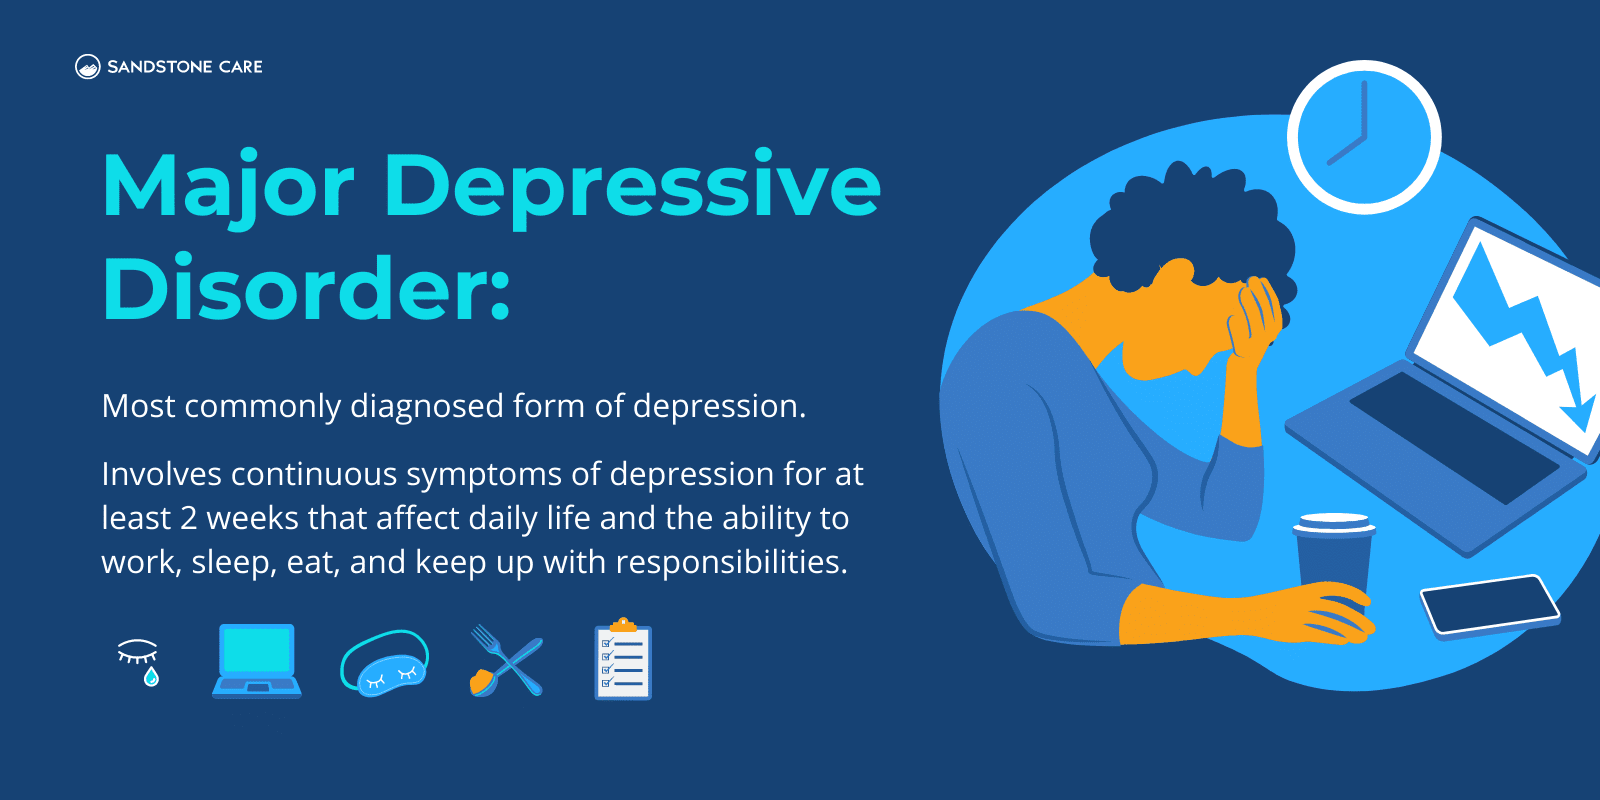 The definition of Major Depressive Disorder is explained with relevant illustrations like a human figure getting less productive due to depression